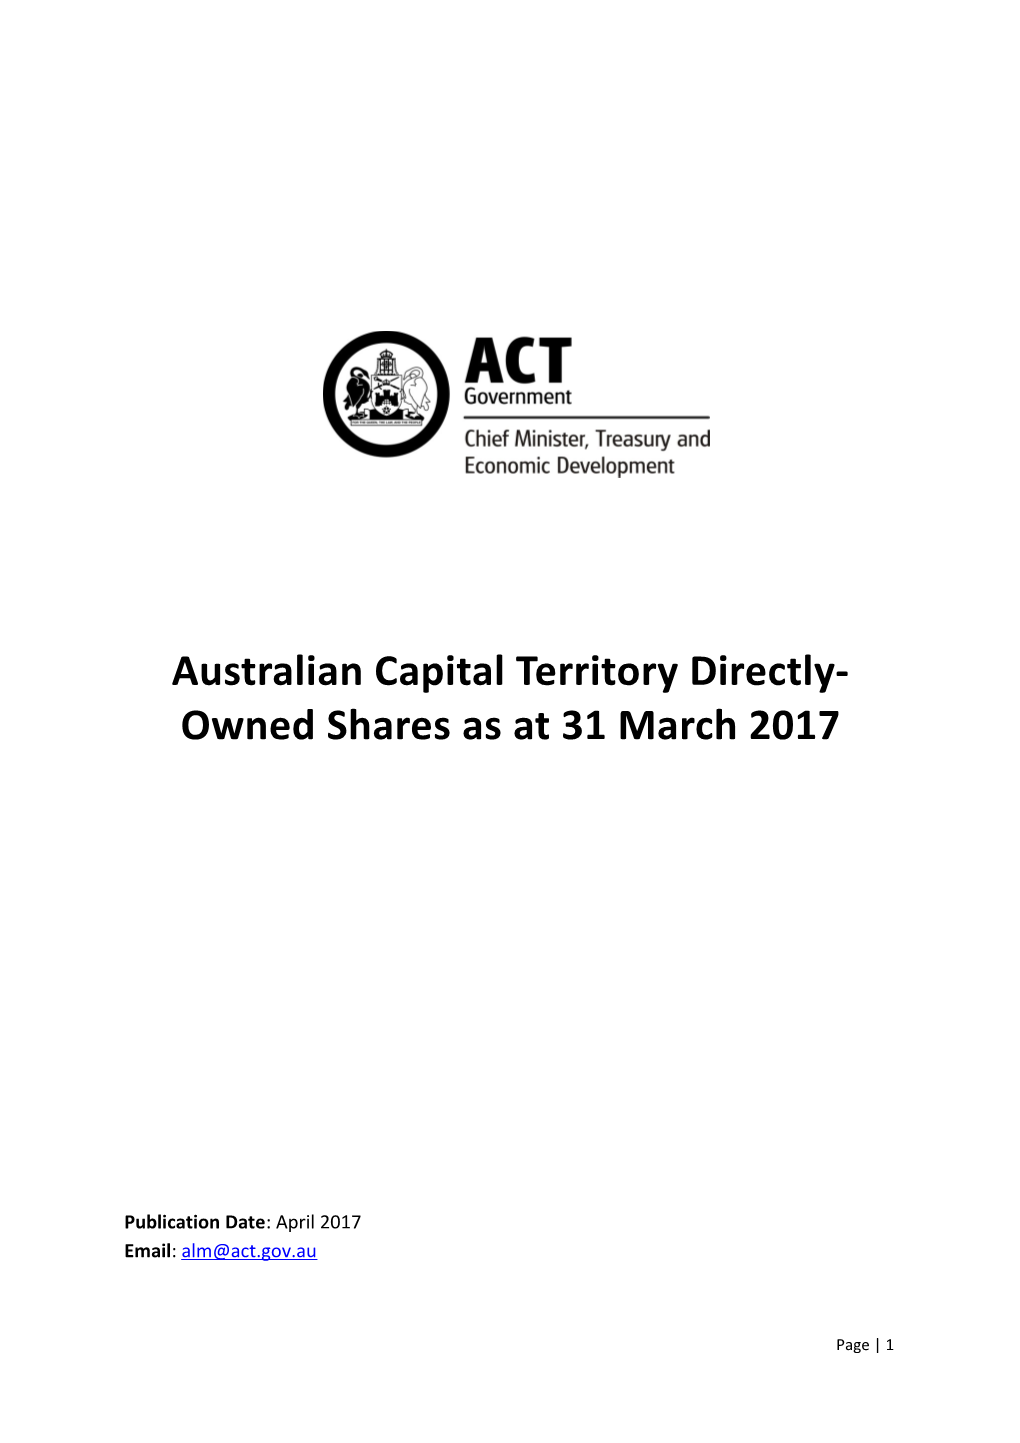 Australian Capital Territory Directly-Owned Shares As at 31 March 2017